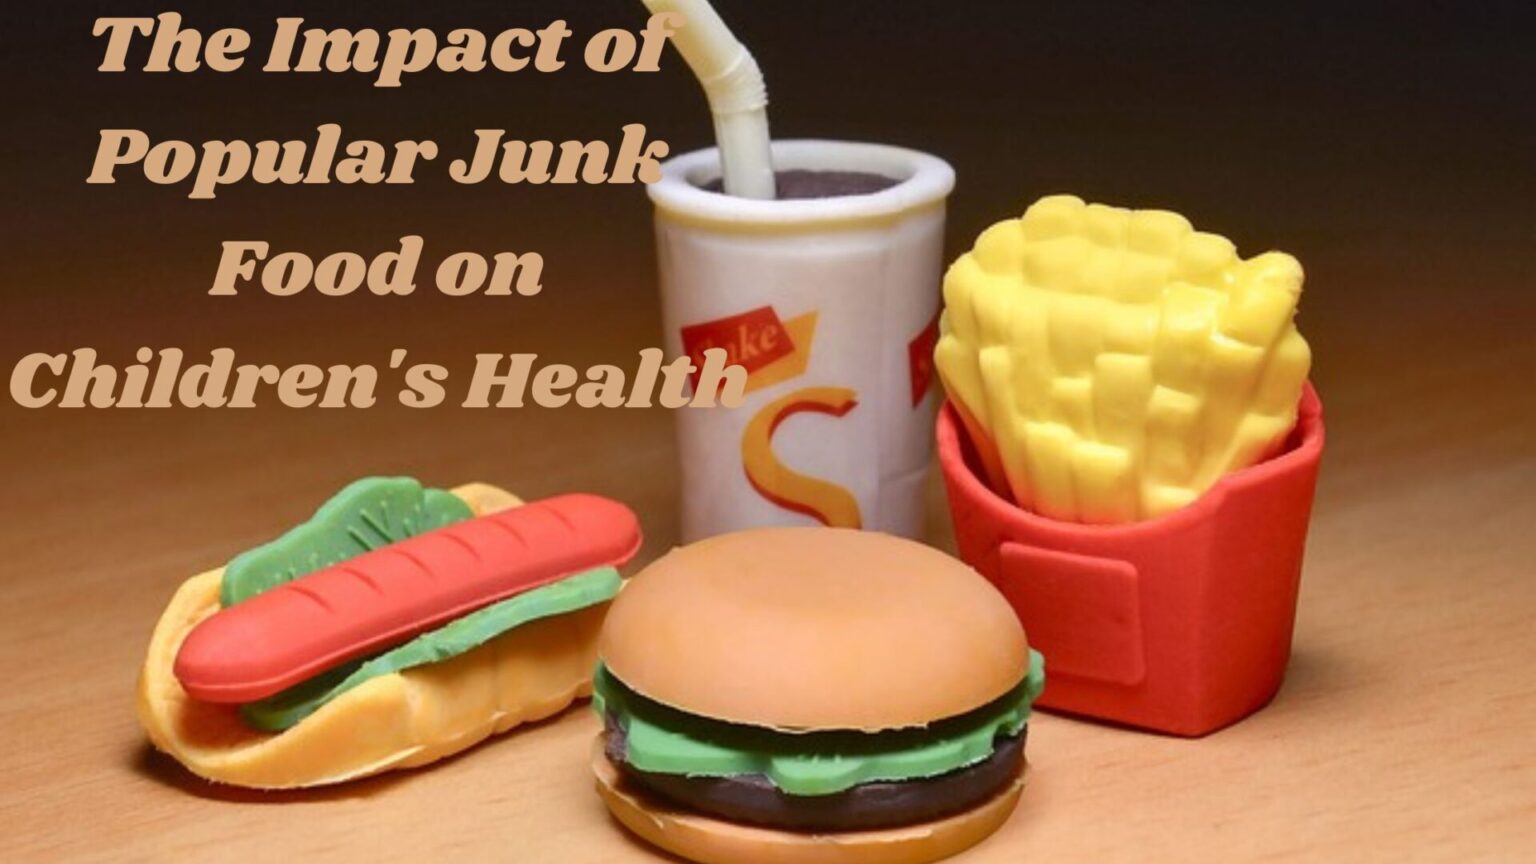 The Impact of Popular Junk Food on Children's Health